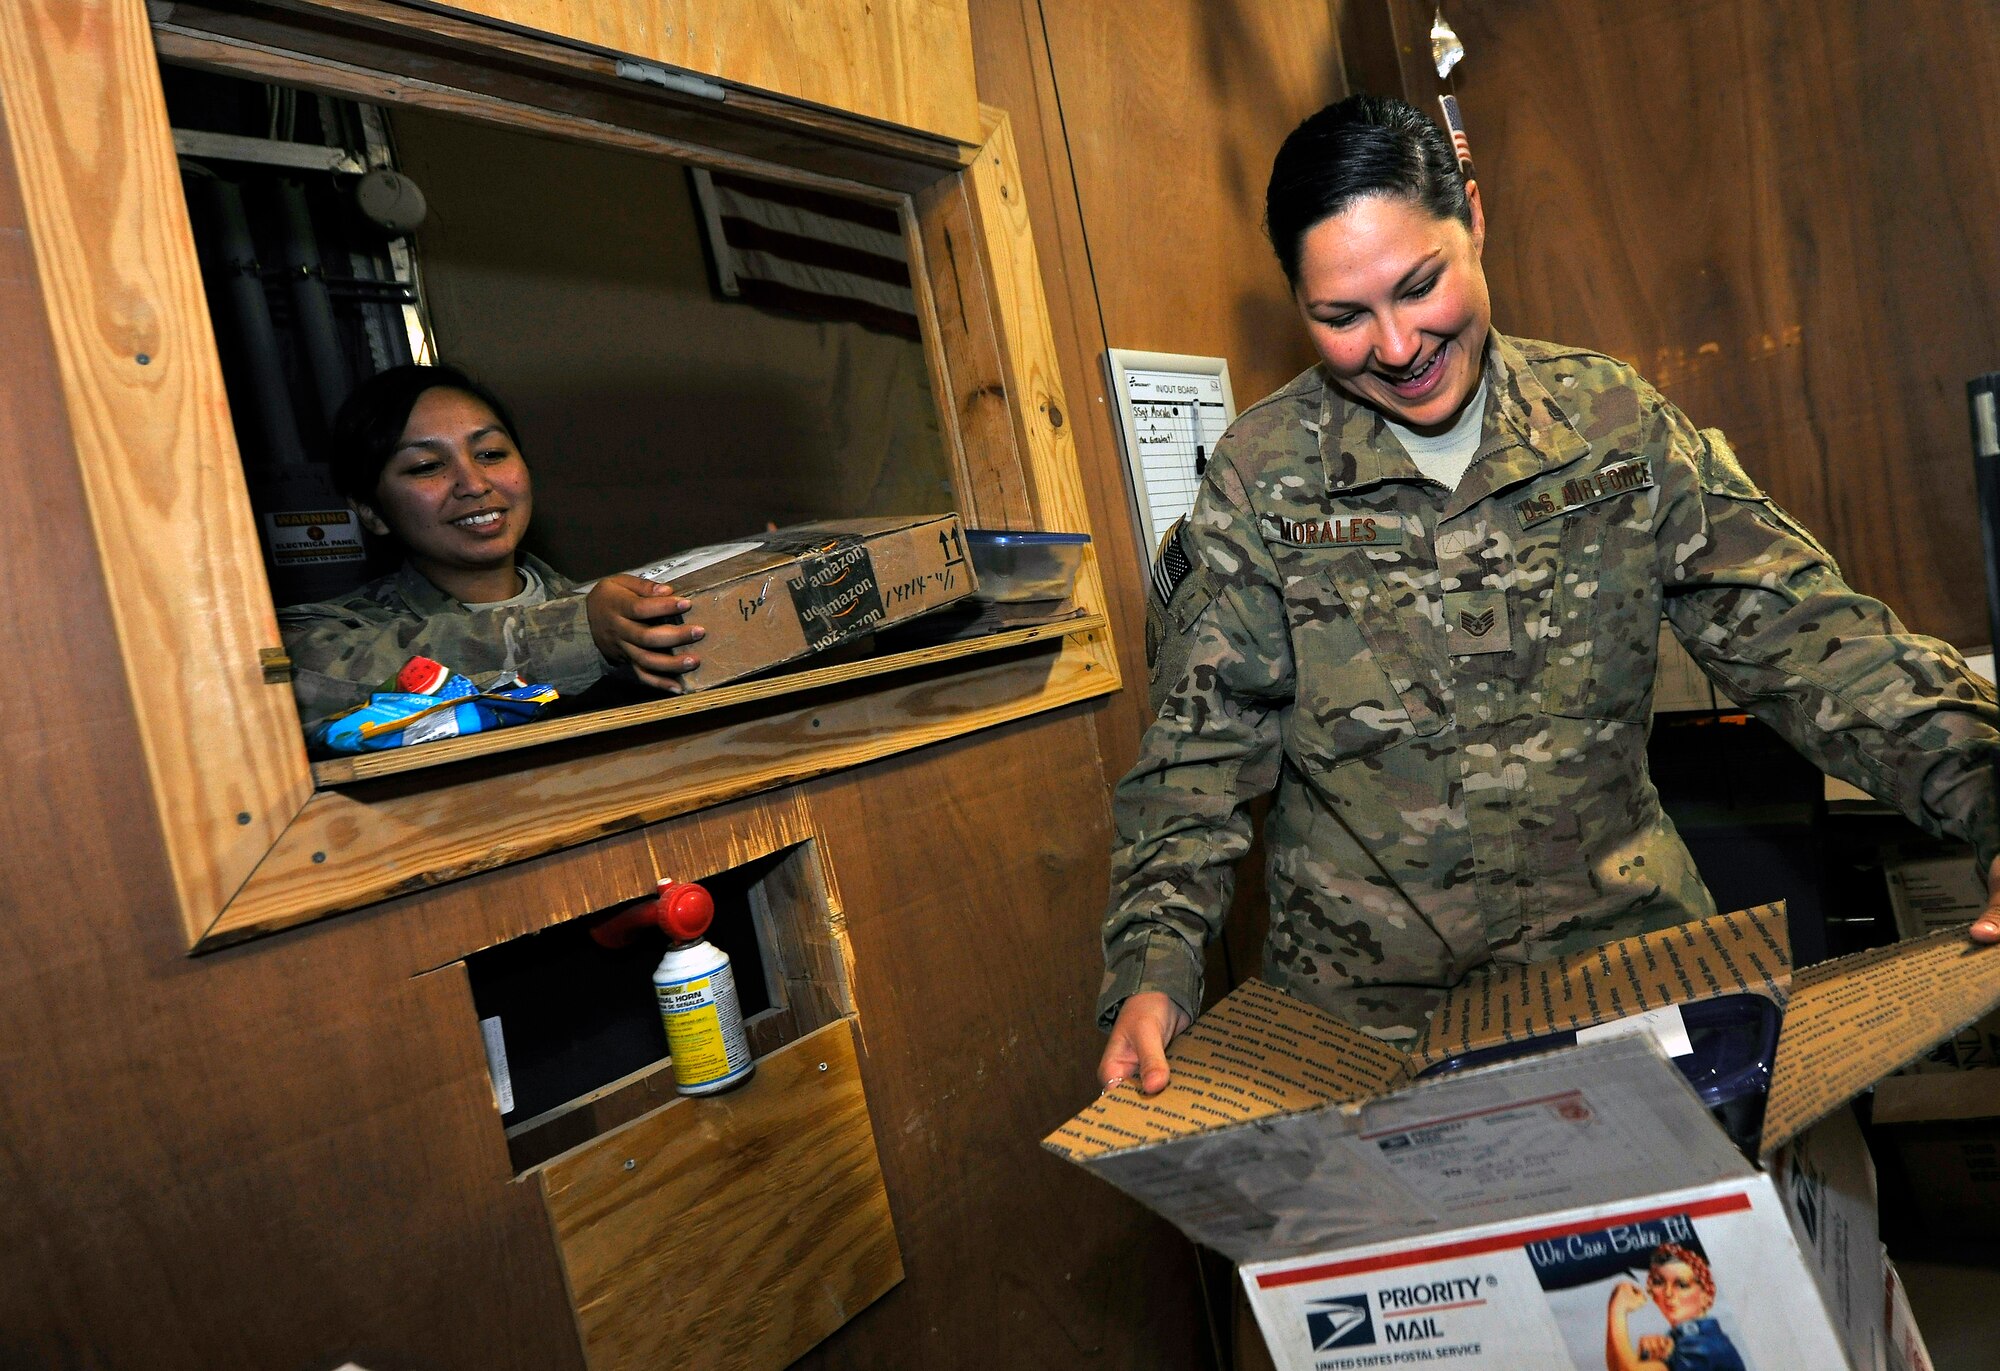 Senior Airman Sasha Brown, a member of the 455th Expeditionary Knowledge Operations Management office, delivers mail to Staff Sgt. Cynthia Morales, 455th Expeditionary Mission Support Group commander’s executive administrator, at Bagram Airfield, Afghanistan, Nov. 19, 2012.  The KOM Office handles the sorting and delivery of the base mail, as well as other functions like managing the Automated Military Postal System with accountable mail notifications. (U.S. Air Force photo/Senior Airman Chris Willis)